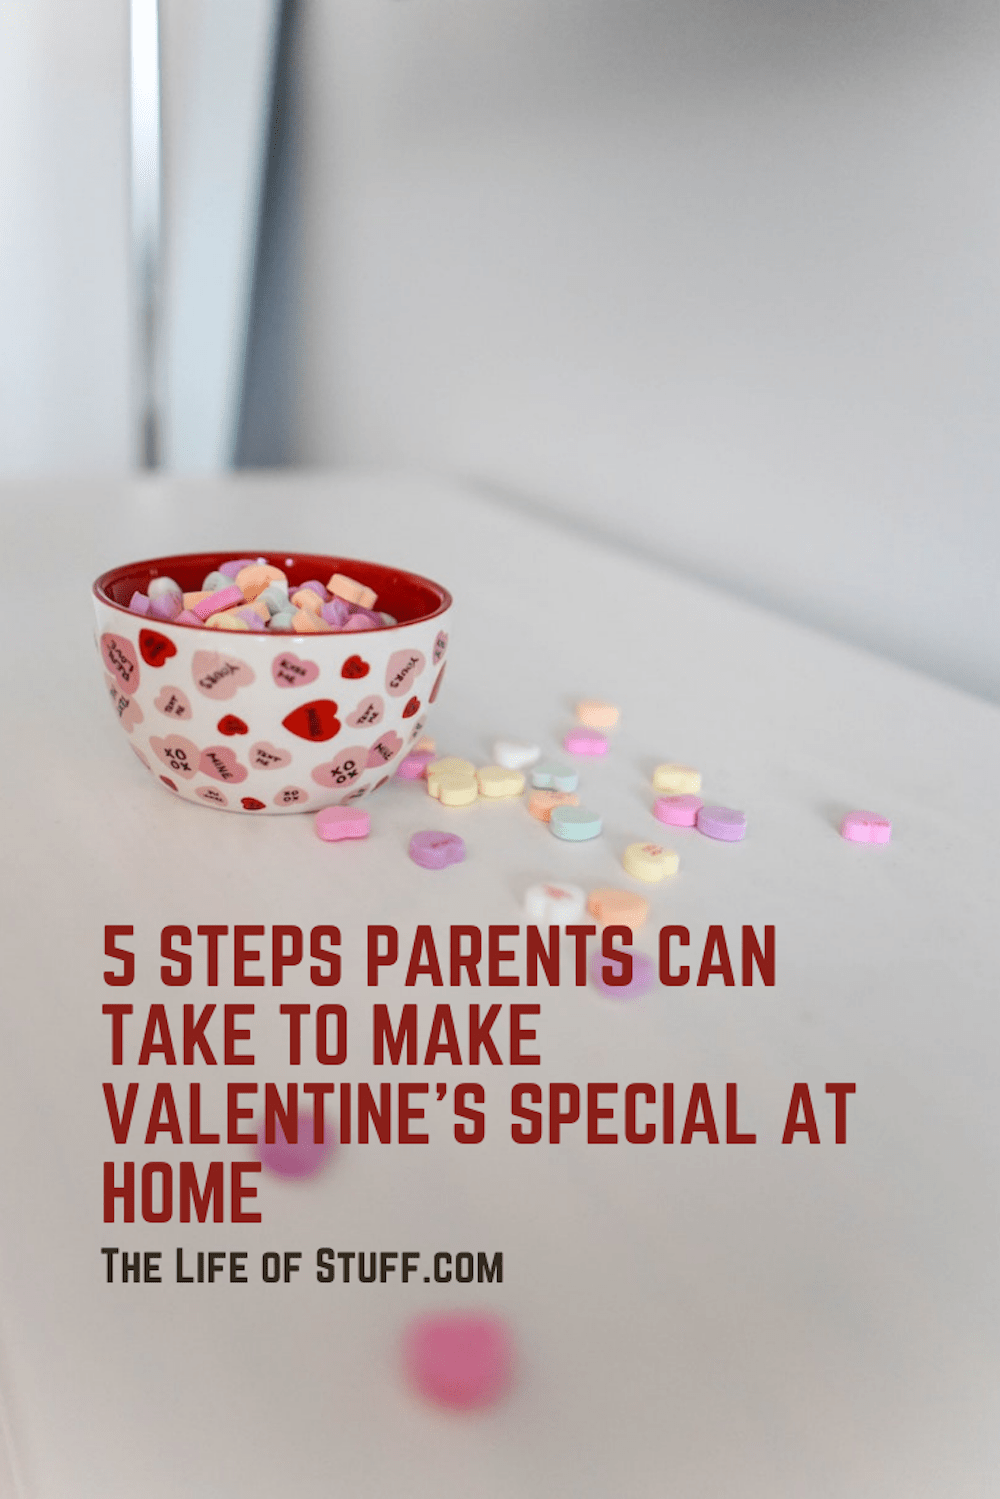 5 Steps Parents Can Take to Make Valentine's Special At Home - The Life of Stuff